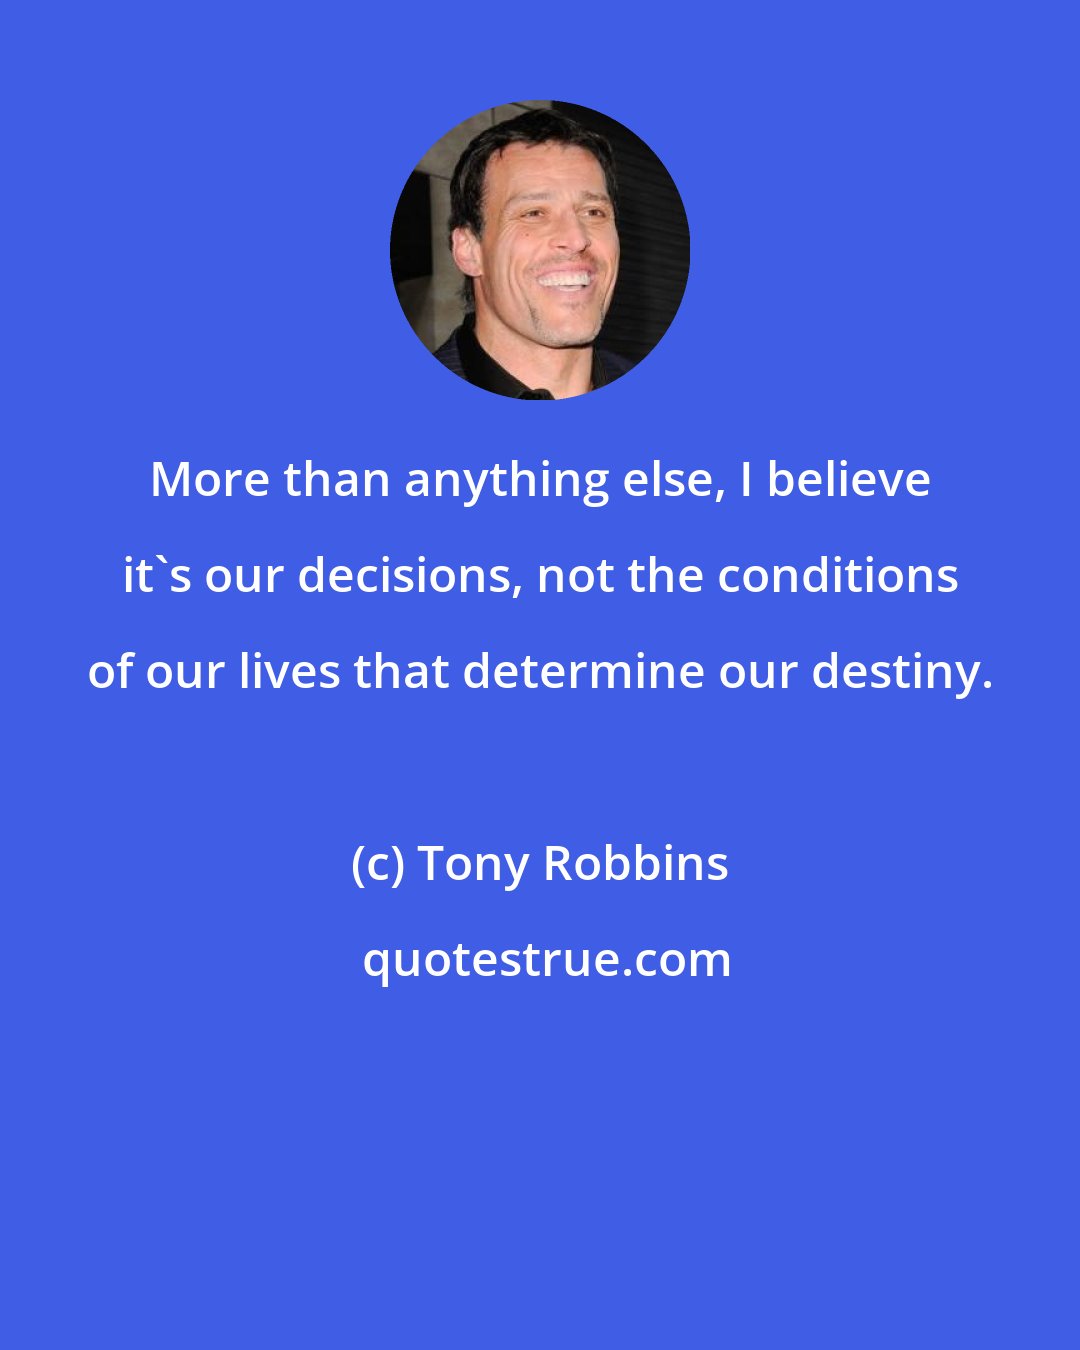 Tony Robbins: More than anything else, I believe it's our decisions, not the conditions of our lives that determine our destiny.